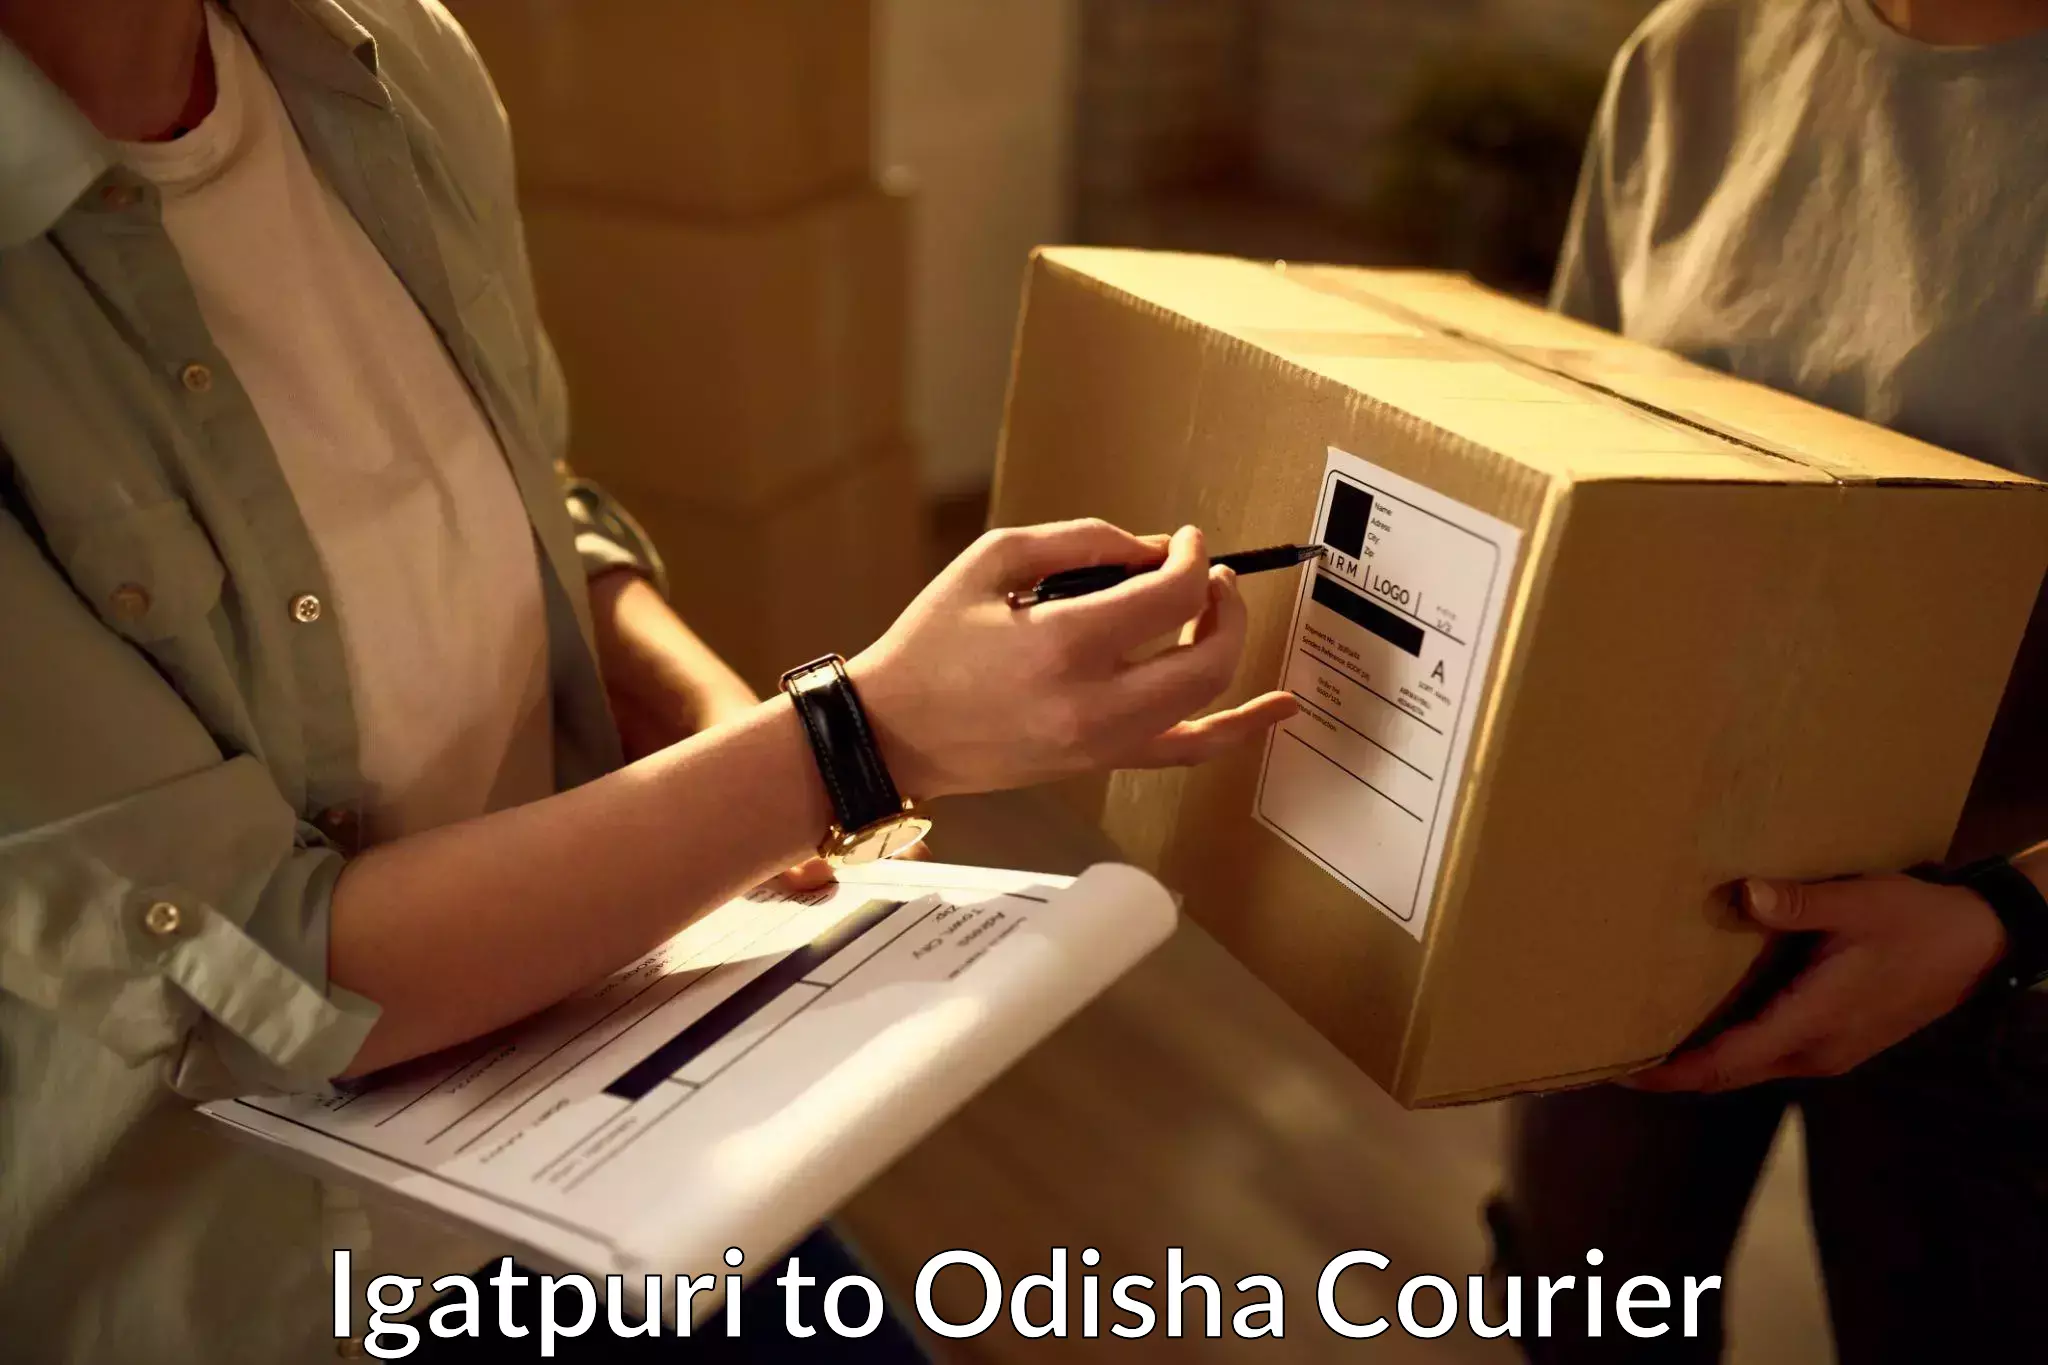 International courier networks in Igatpuri to Mathili